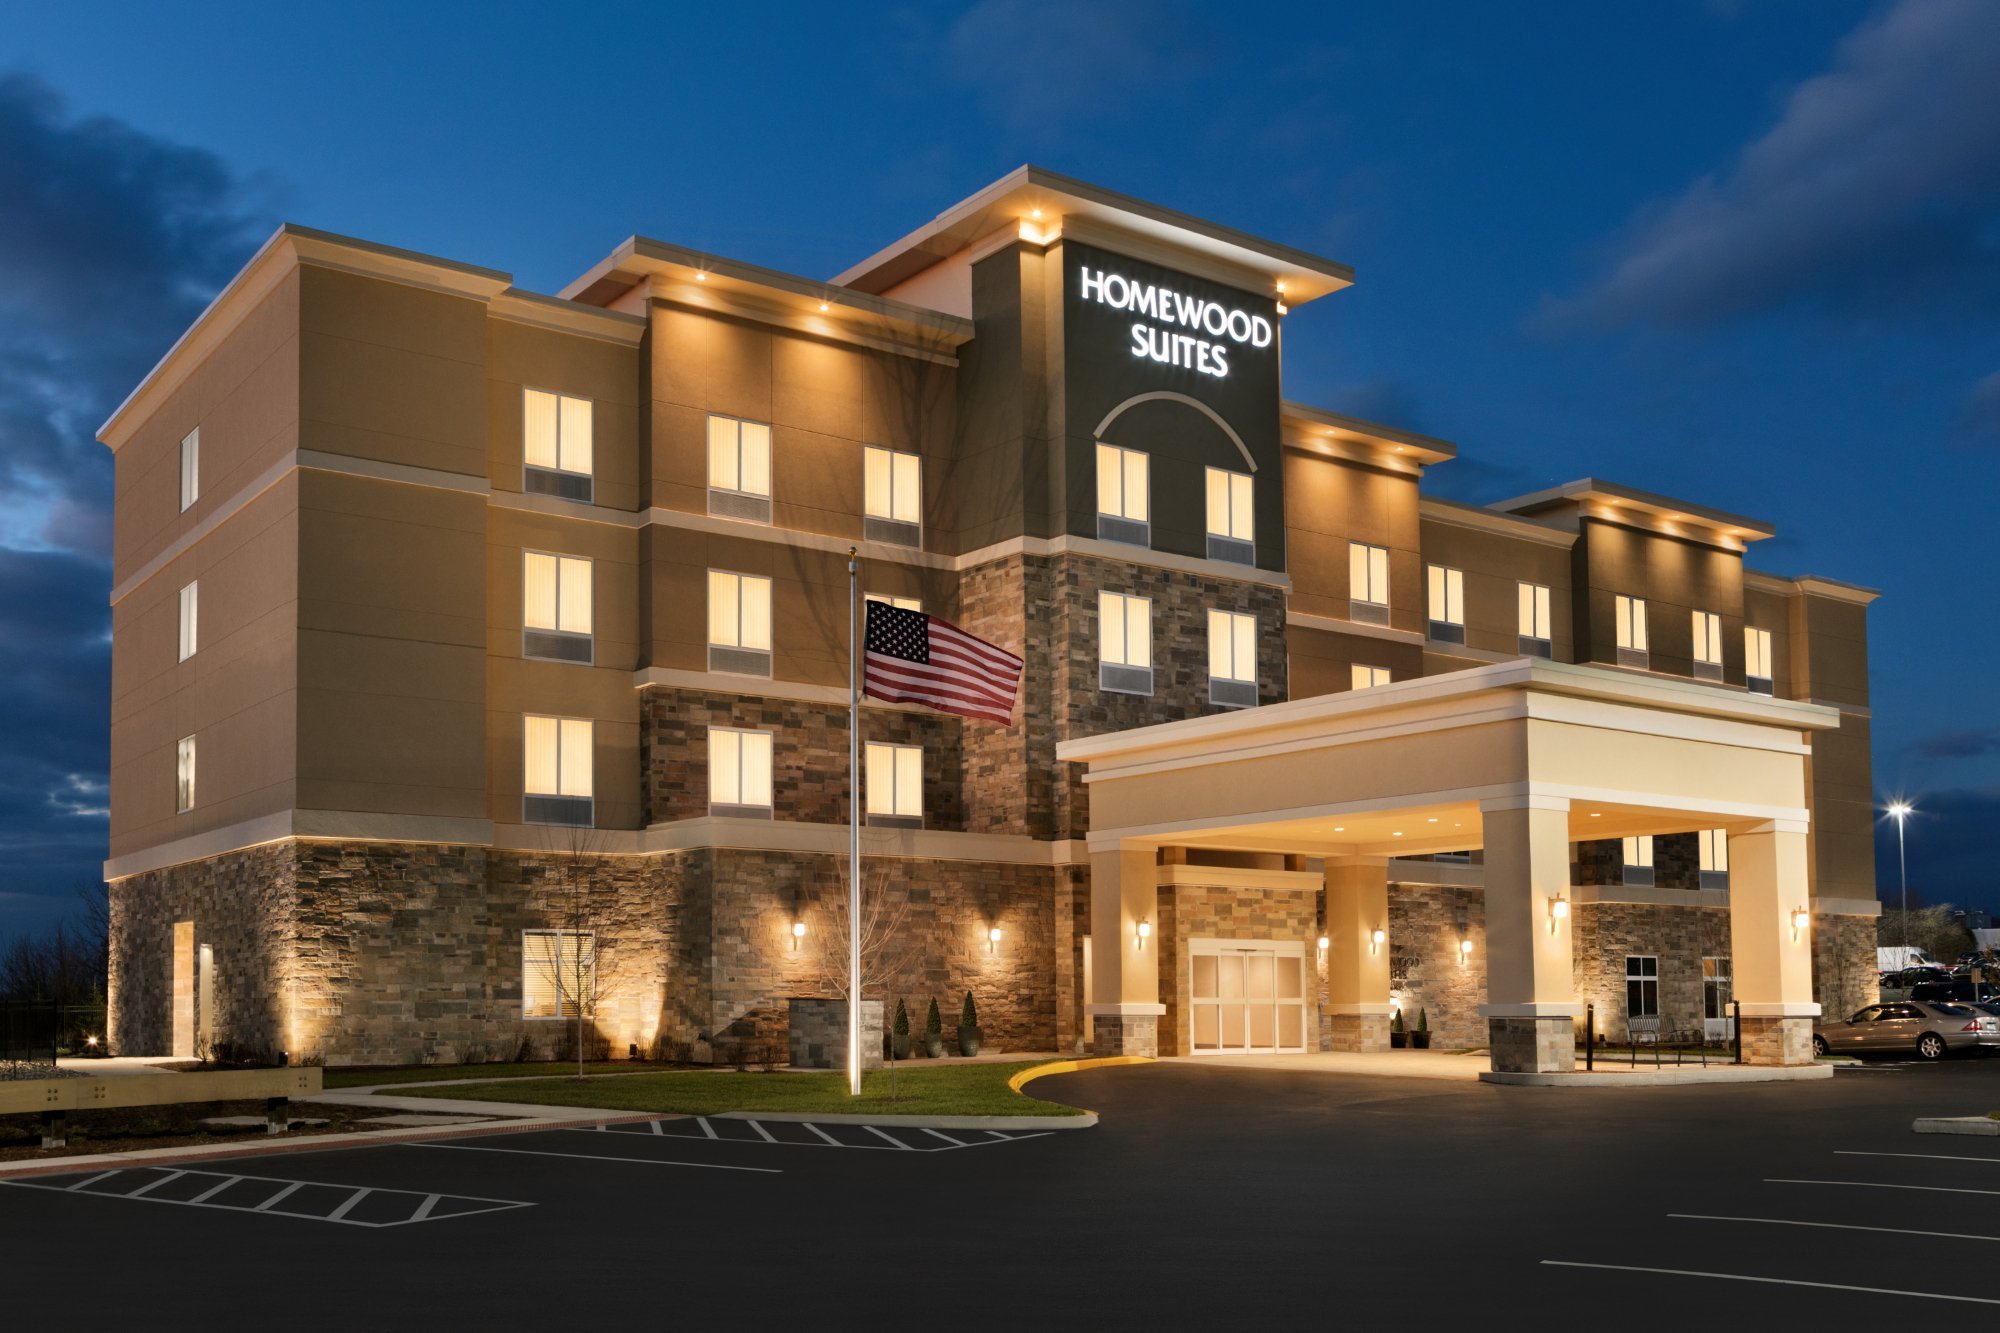 Photo of Homewood Suites by Hilton Hartford Manchester, Manchester, CT